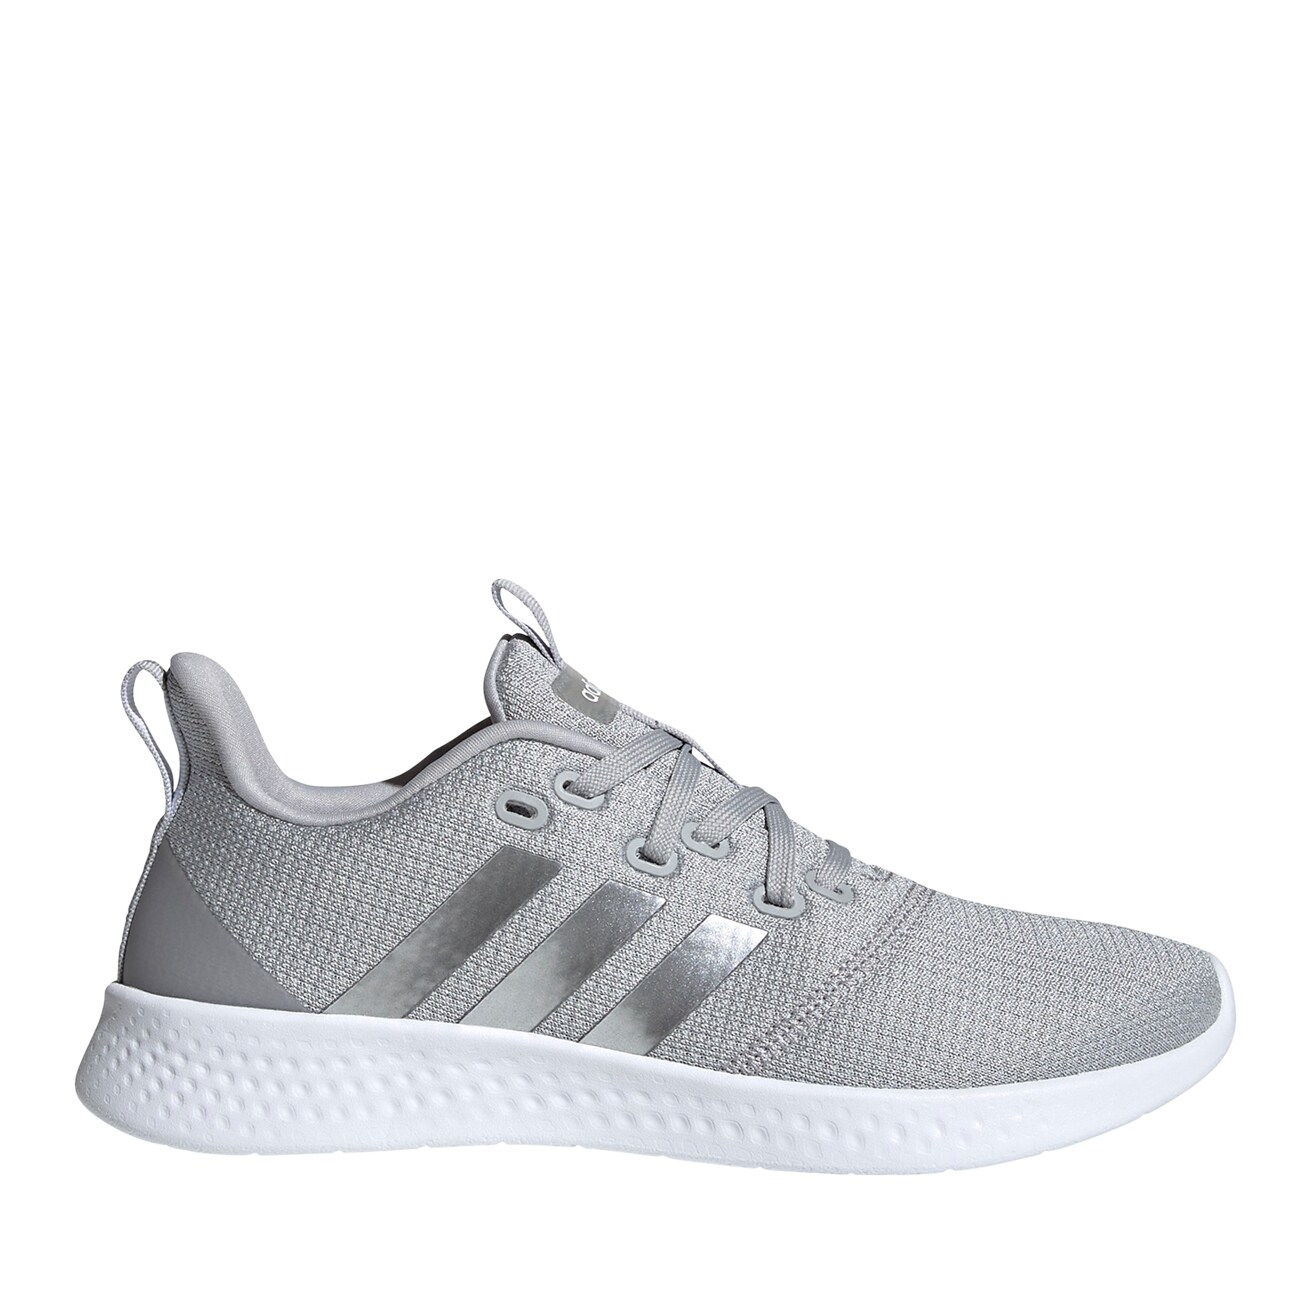 order adidas shoes online canada